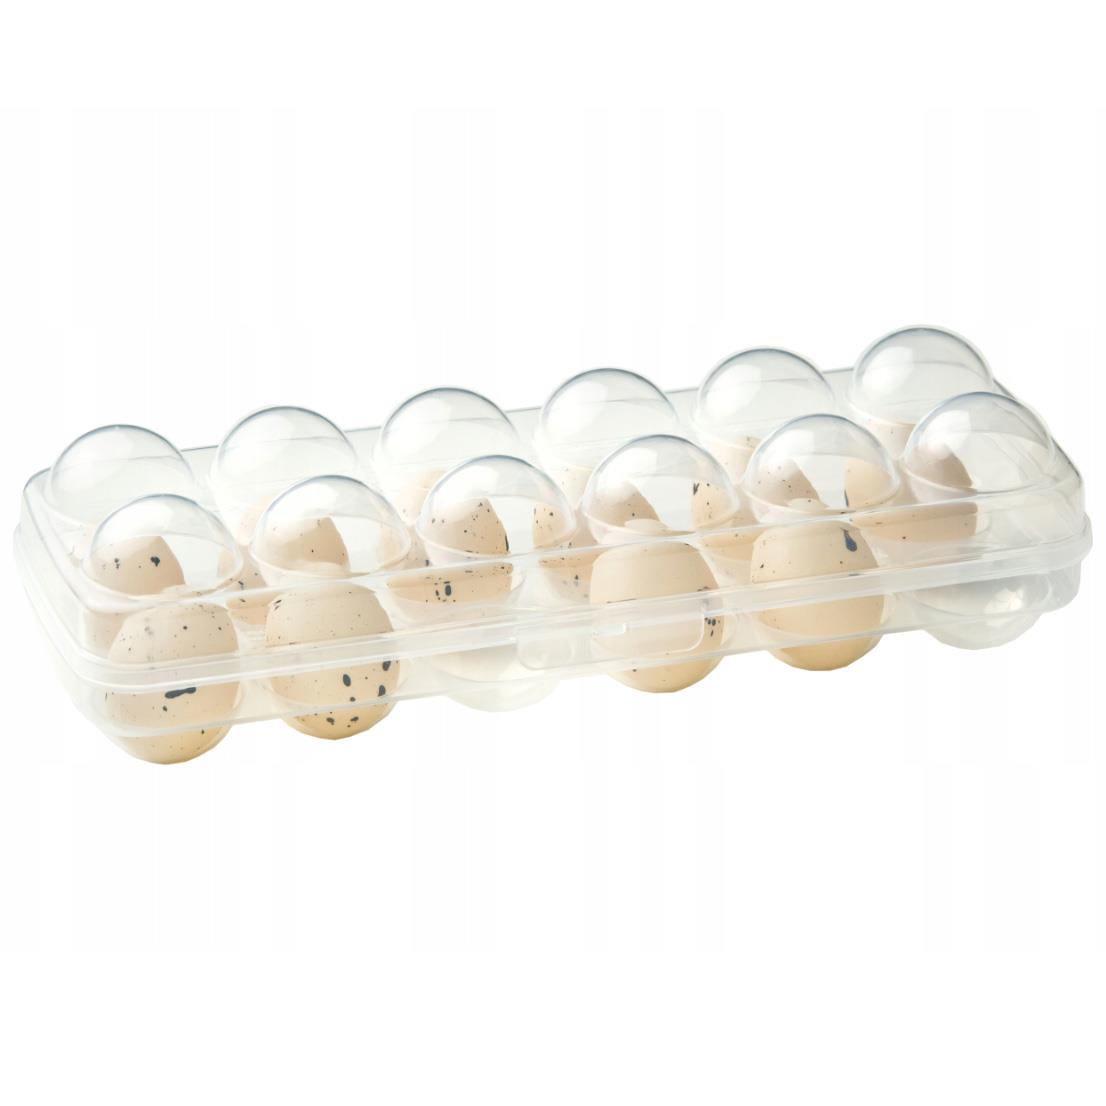 12 Eggs Holder With Lid by GEEZY - UKBuyZone